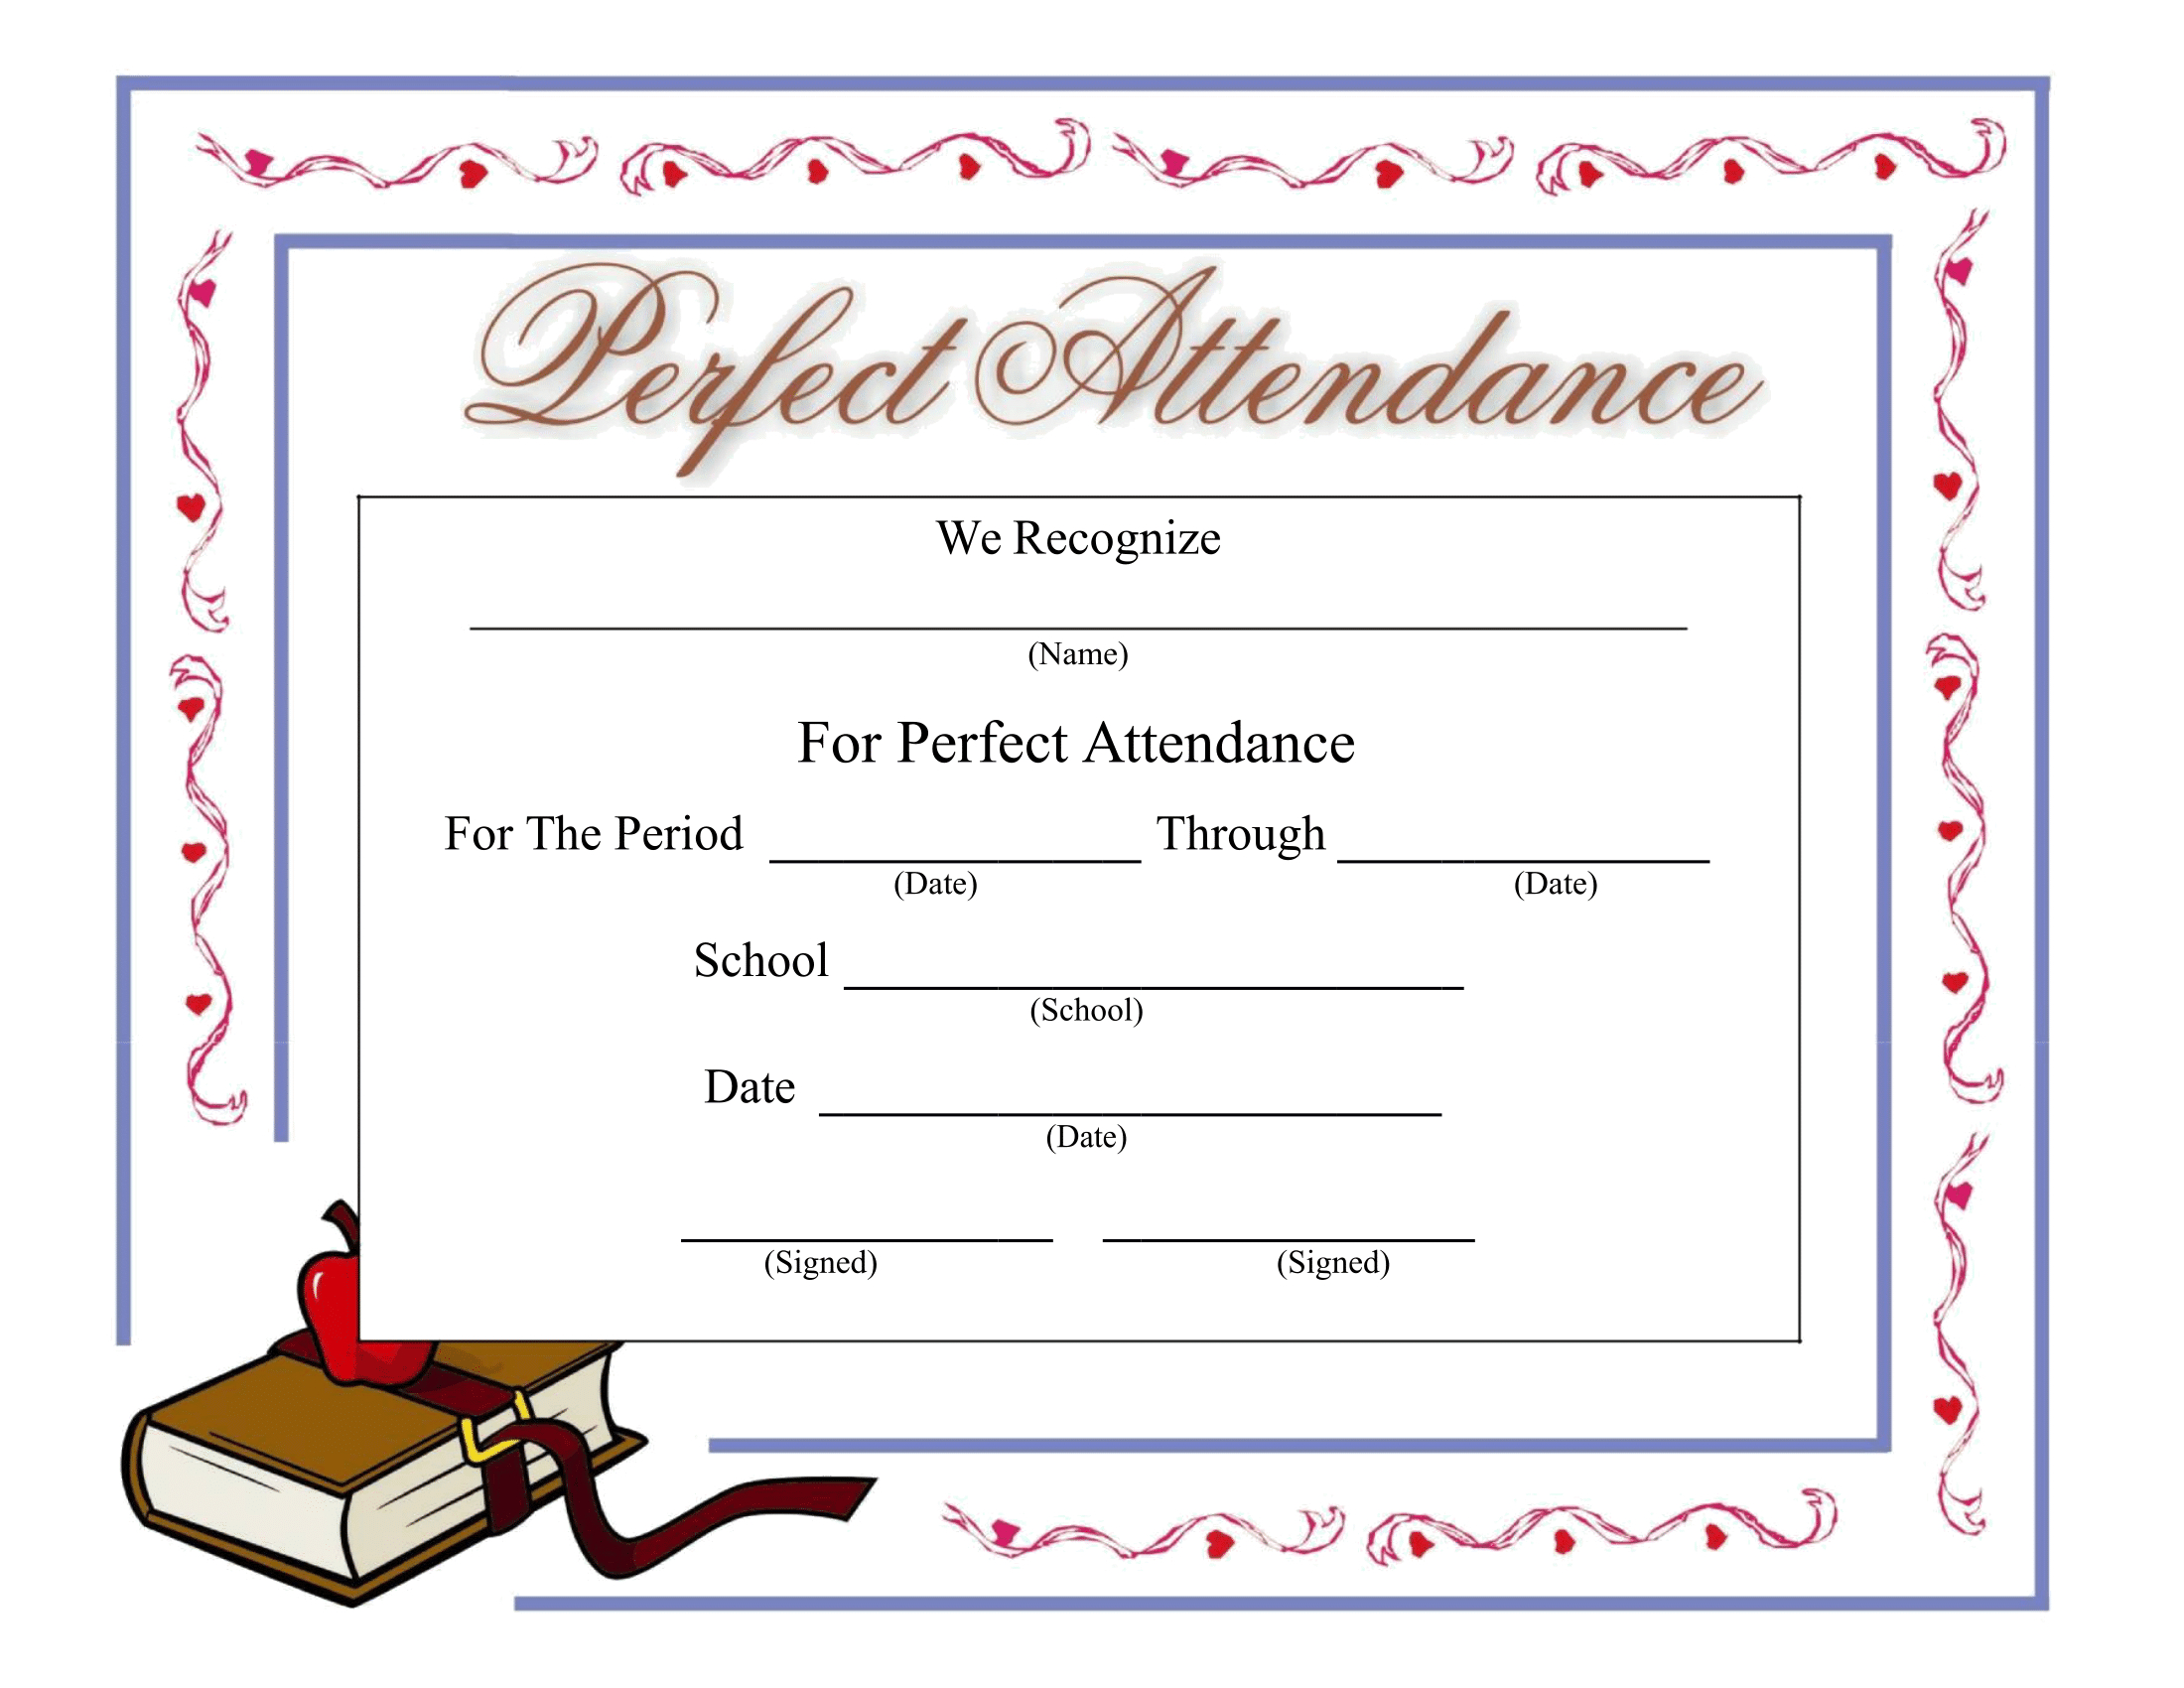 stupendous-perfect-attendance-certificate-printable-dora-s-throughout-free-vbs-certificate